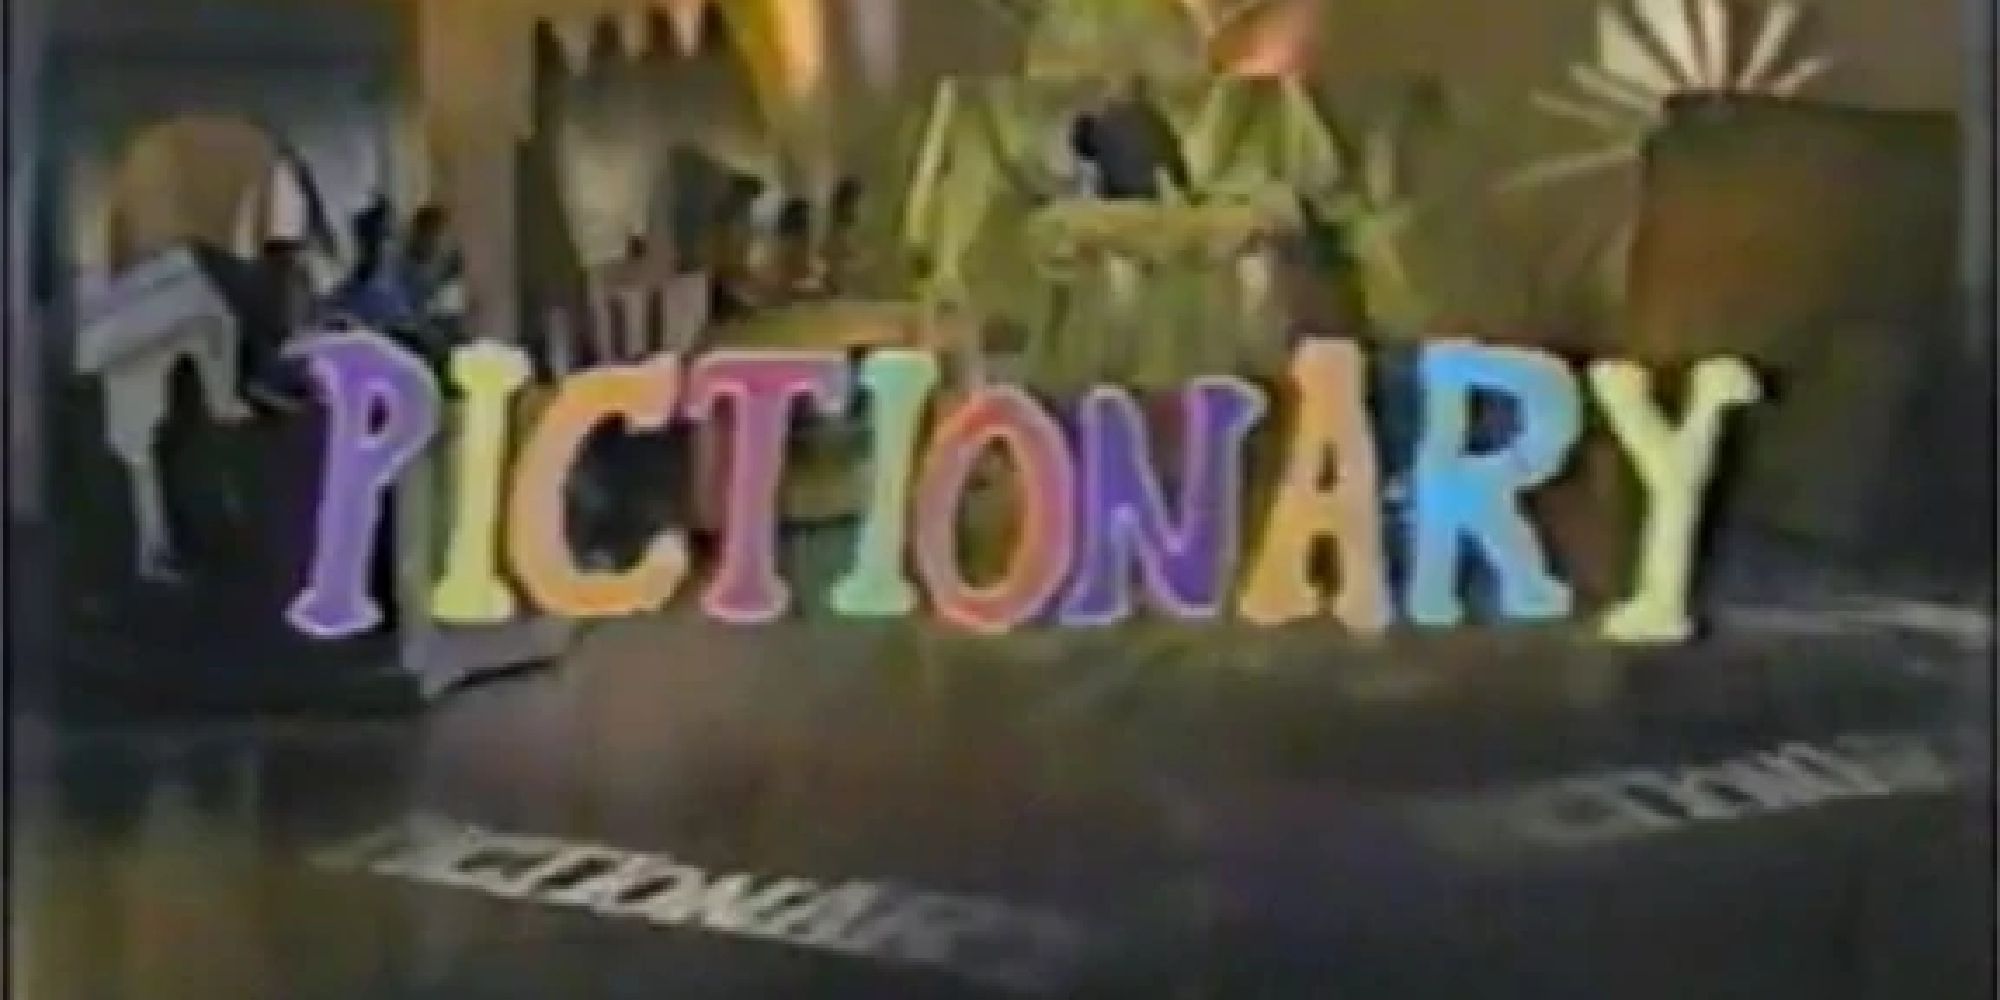 The title card for the Pictionary game show from 1989